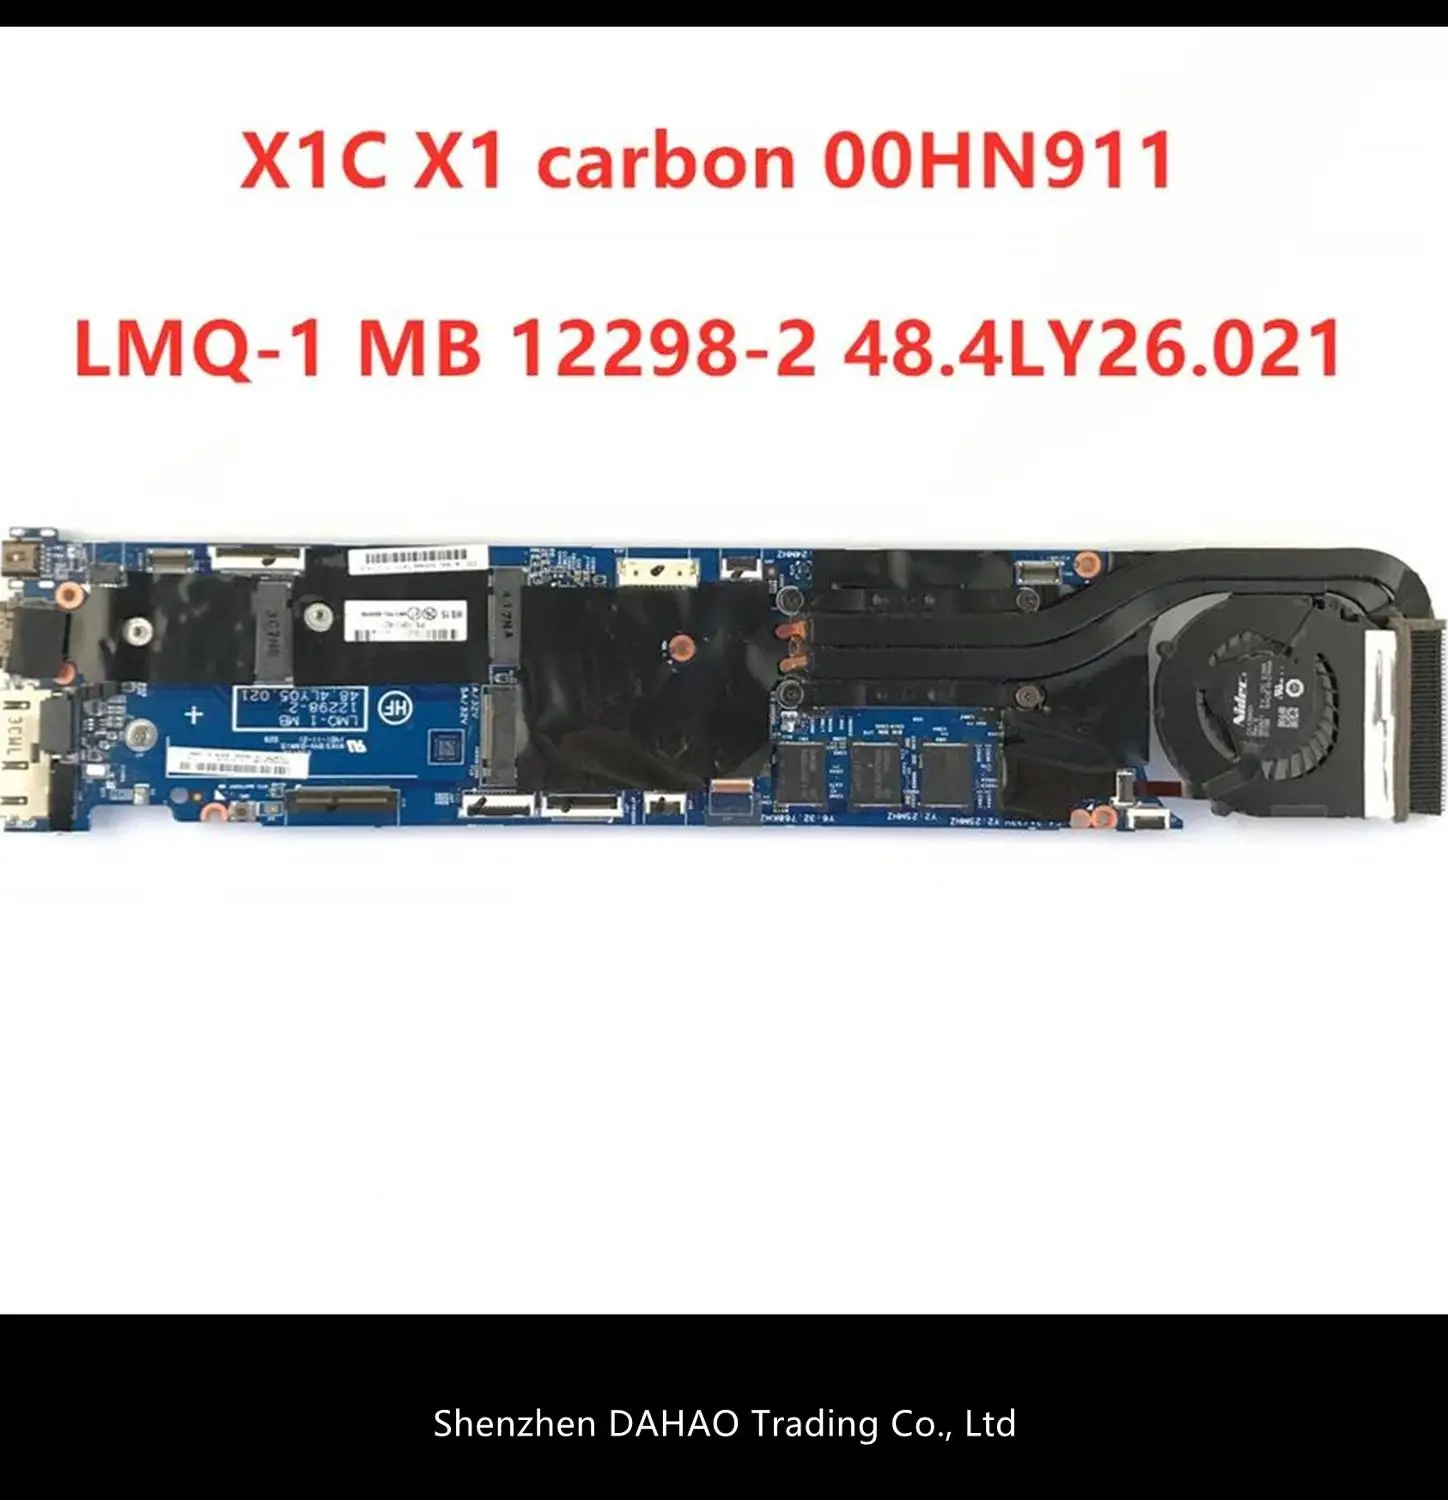 

00HN911 mainboard i5-4210 TPM for lenovo ThinkPad X1C X1 carbon Laptop motherboard LMQ-1 MB 12298-2 48.4LY26.021 Test 100% work